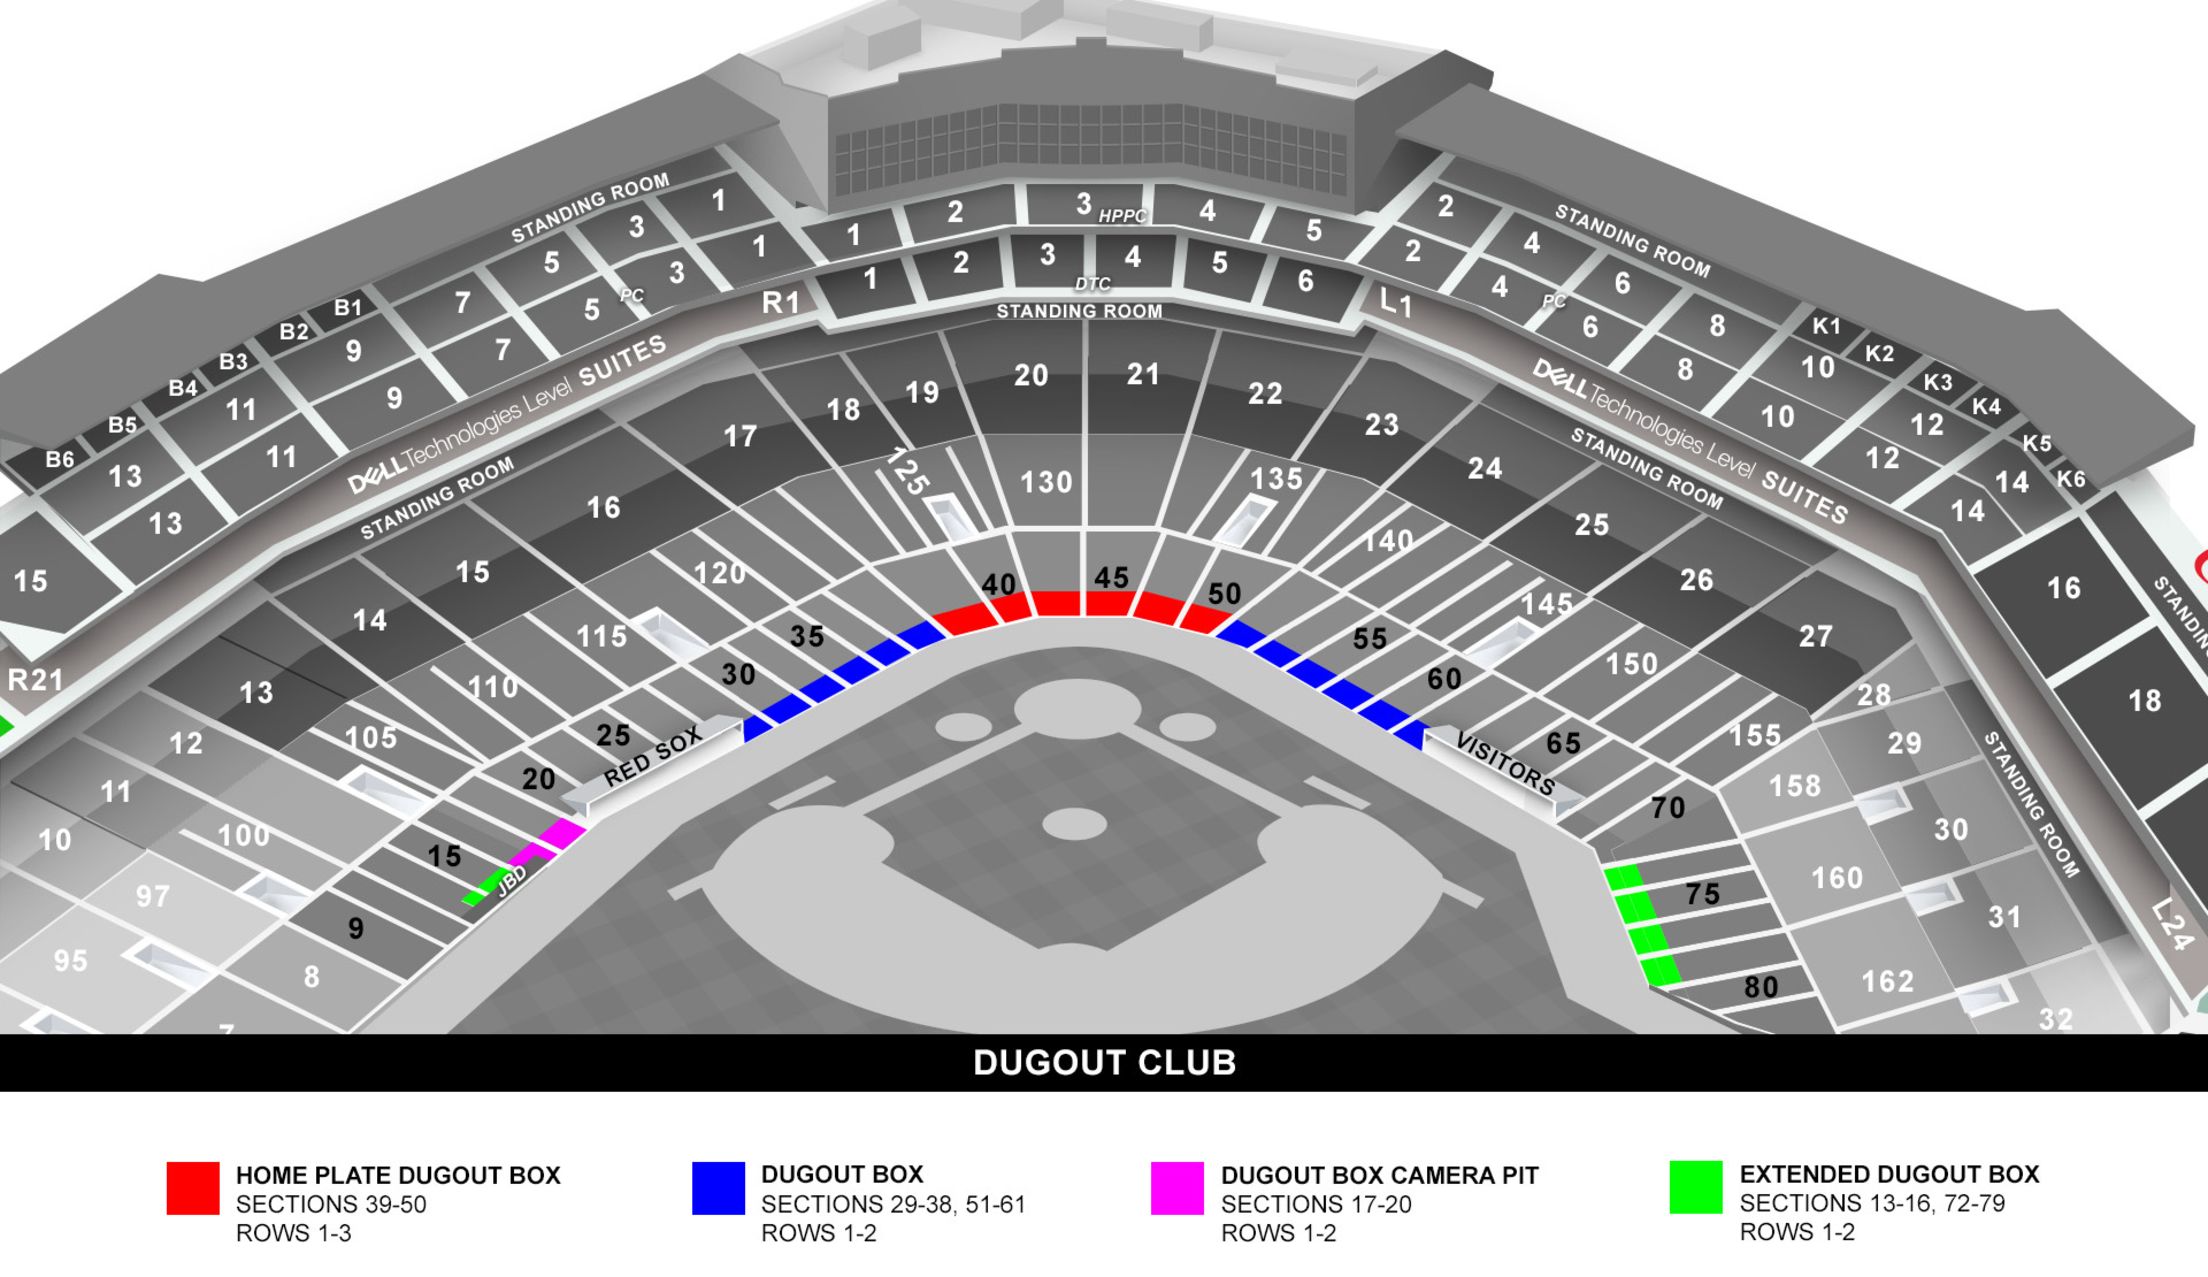 Fenway Park Seating Chart With Rows And Seat Numbers Two Birds Home